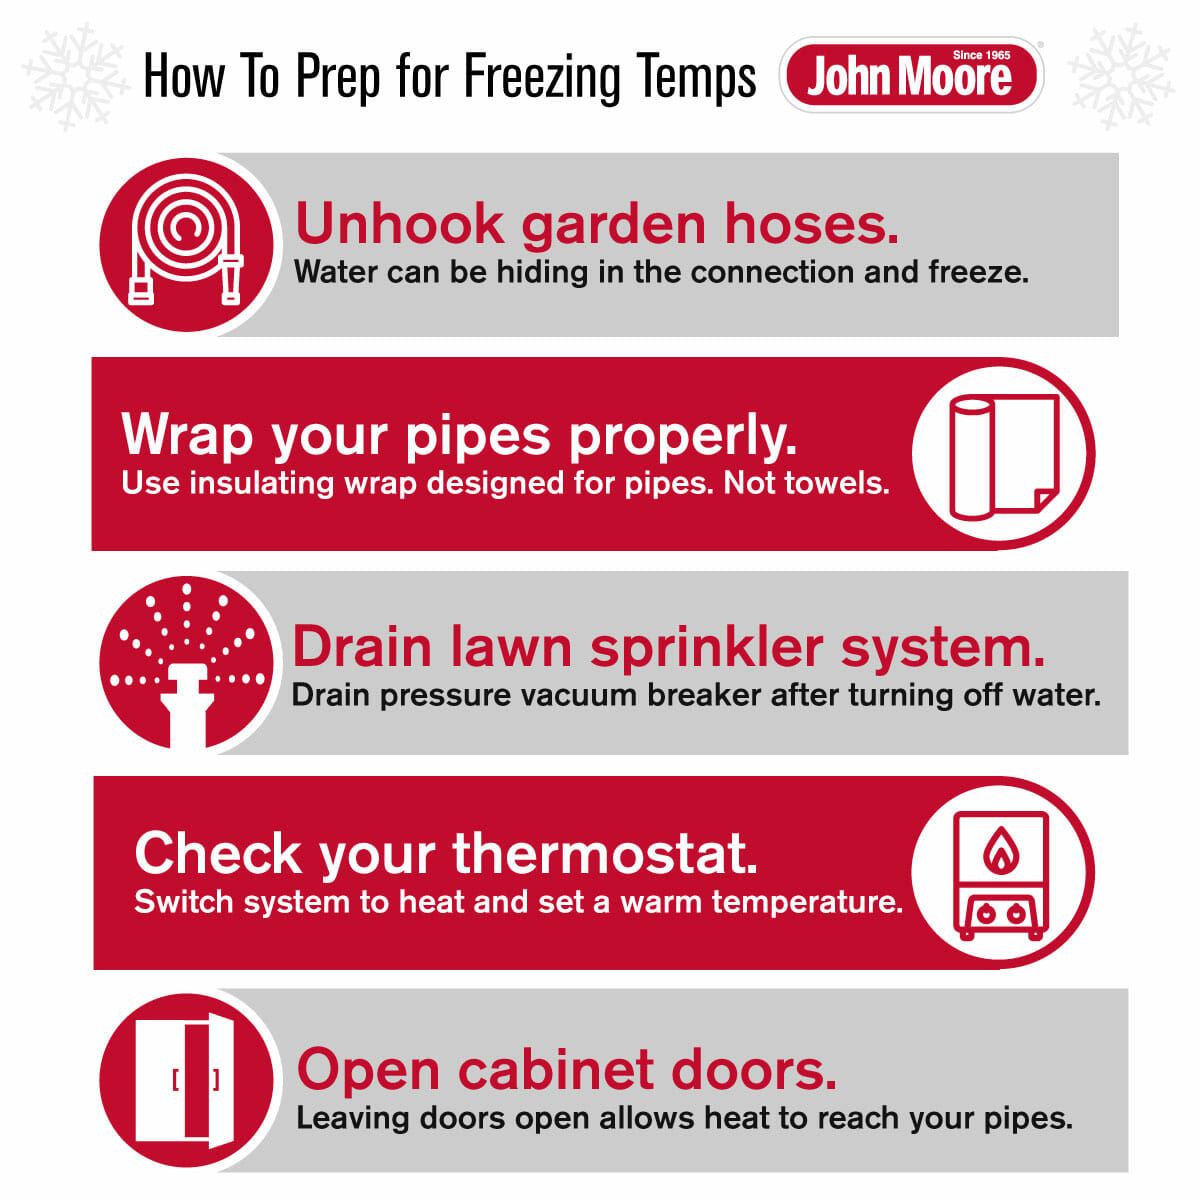 Prepping-for-Freezing-Temps-in-Houston-Infographic